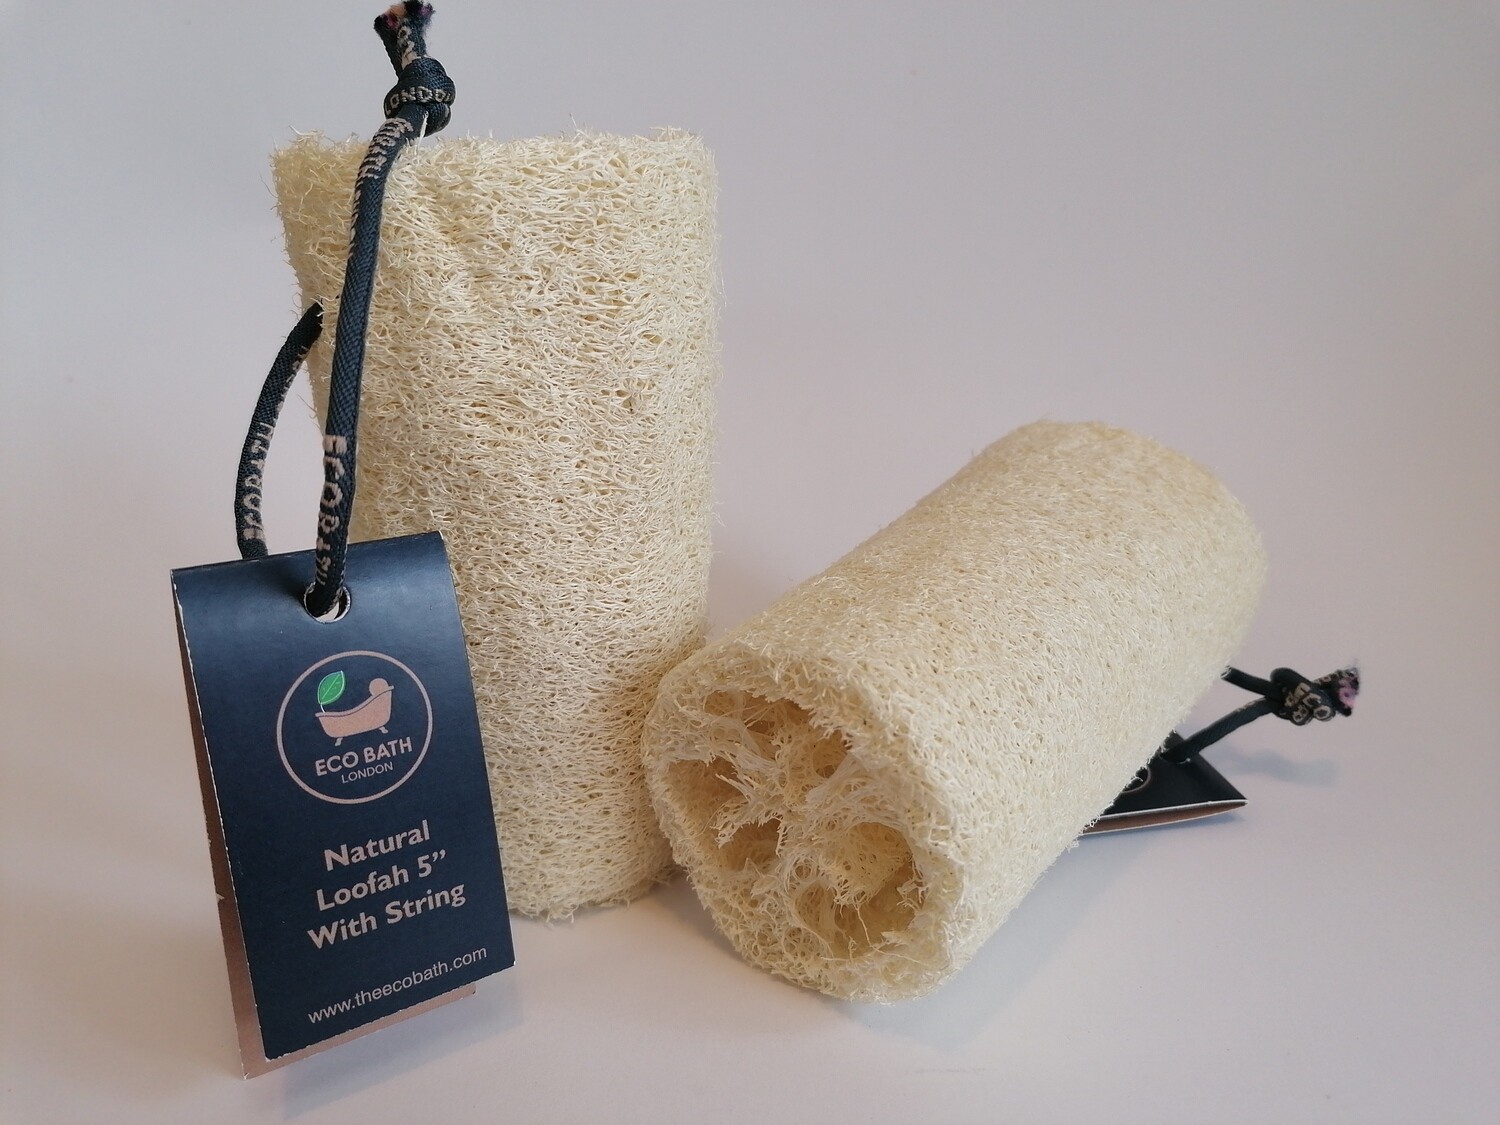 Eco Bath Natural Loofah with String